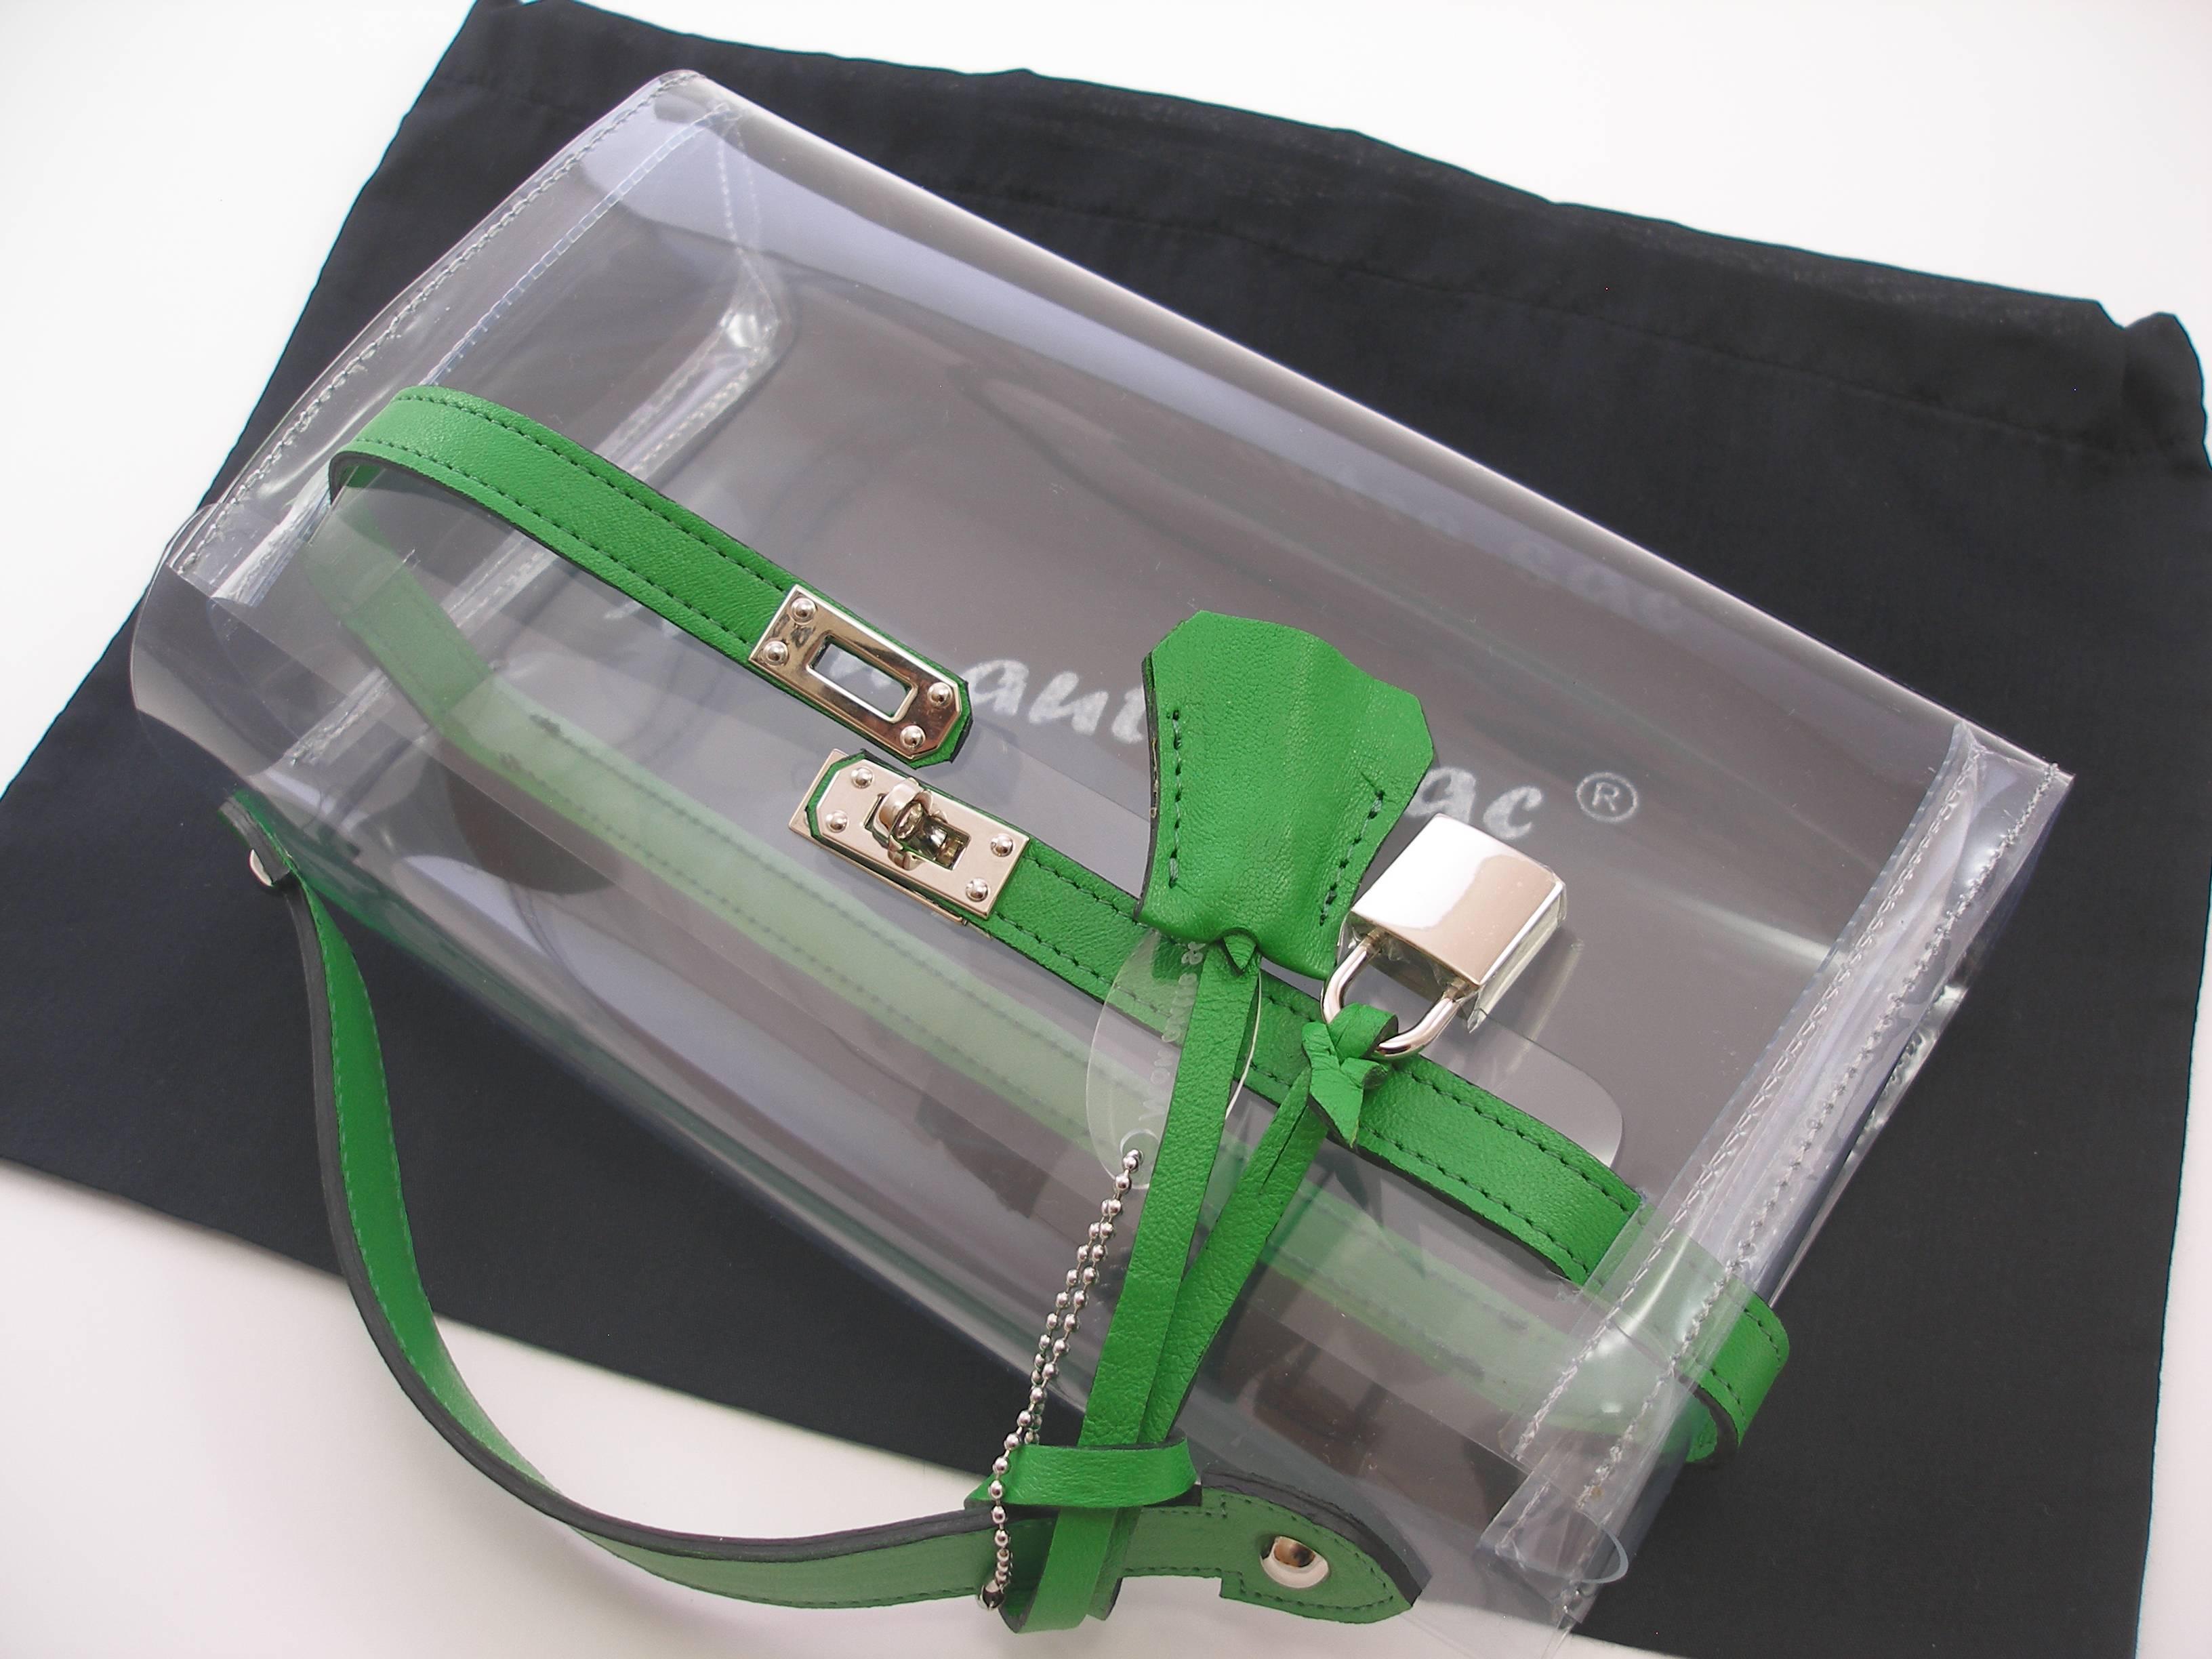 ORIGINAL Mon Autre Sac ® Clutch Crystal Pvc and Green leather / Brand New  1